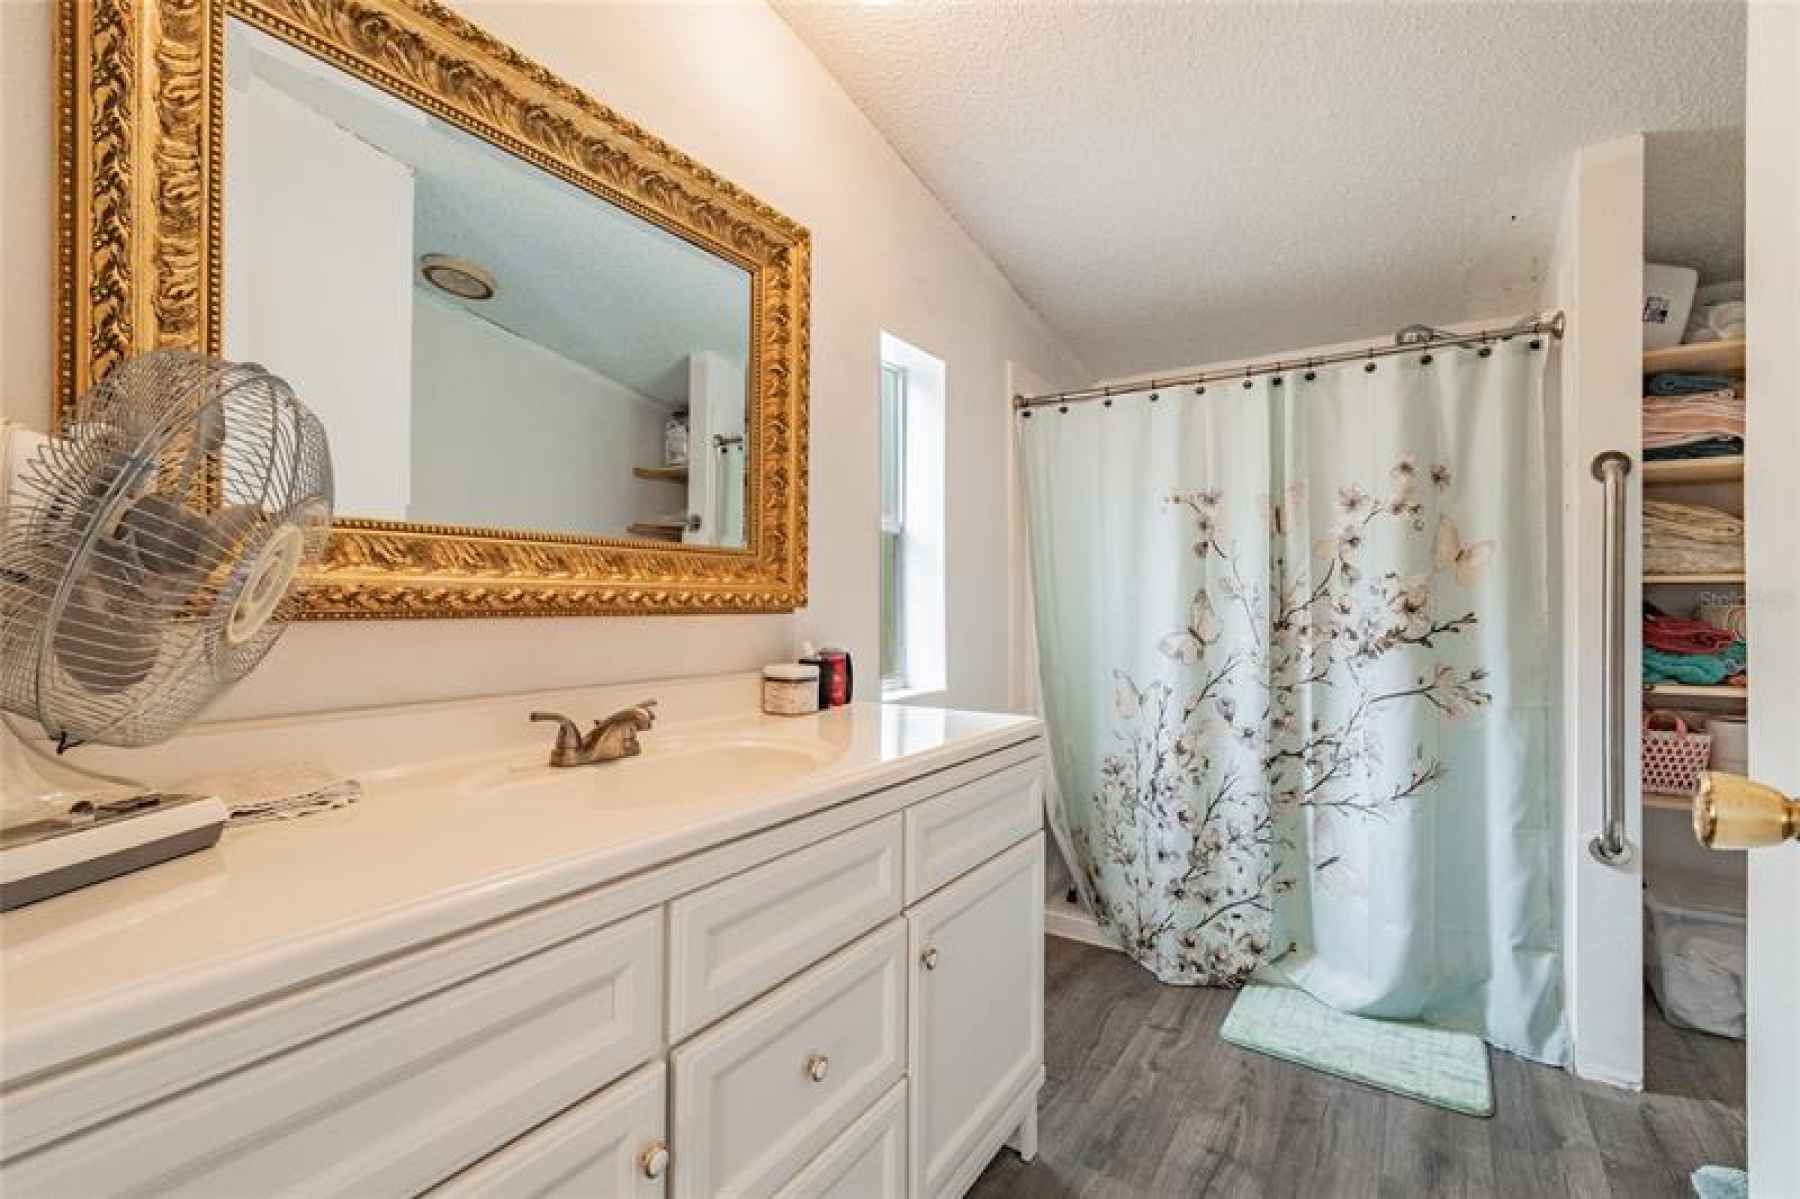 Master bedroom with updated vanity and cabinets.  Grab bar for the shower.